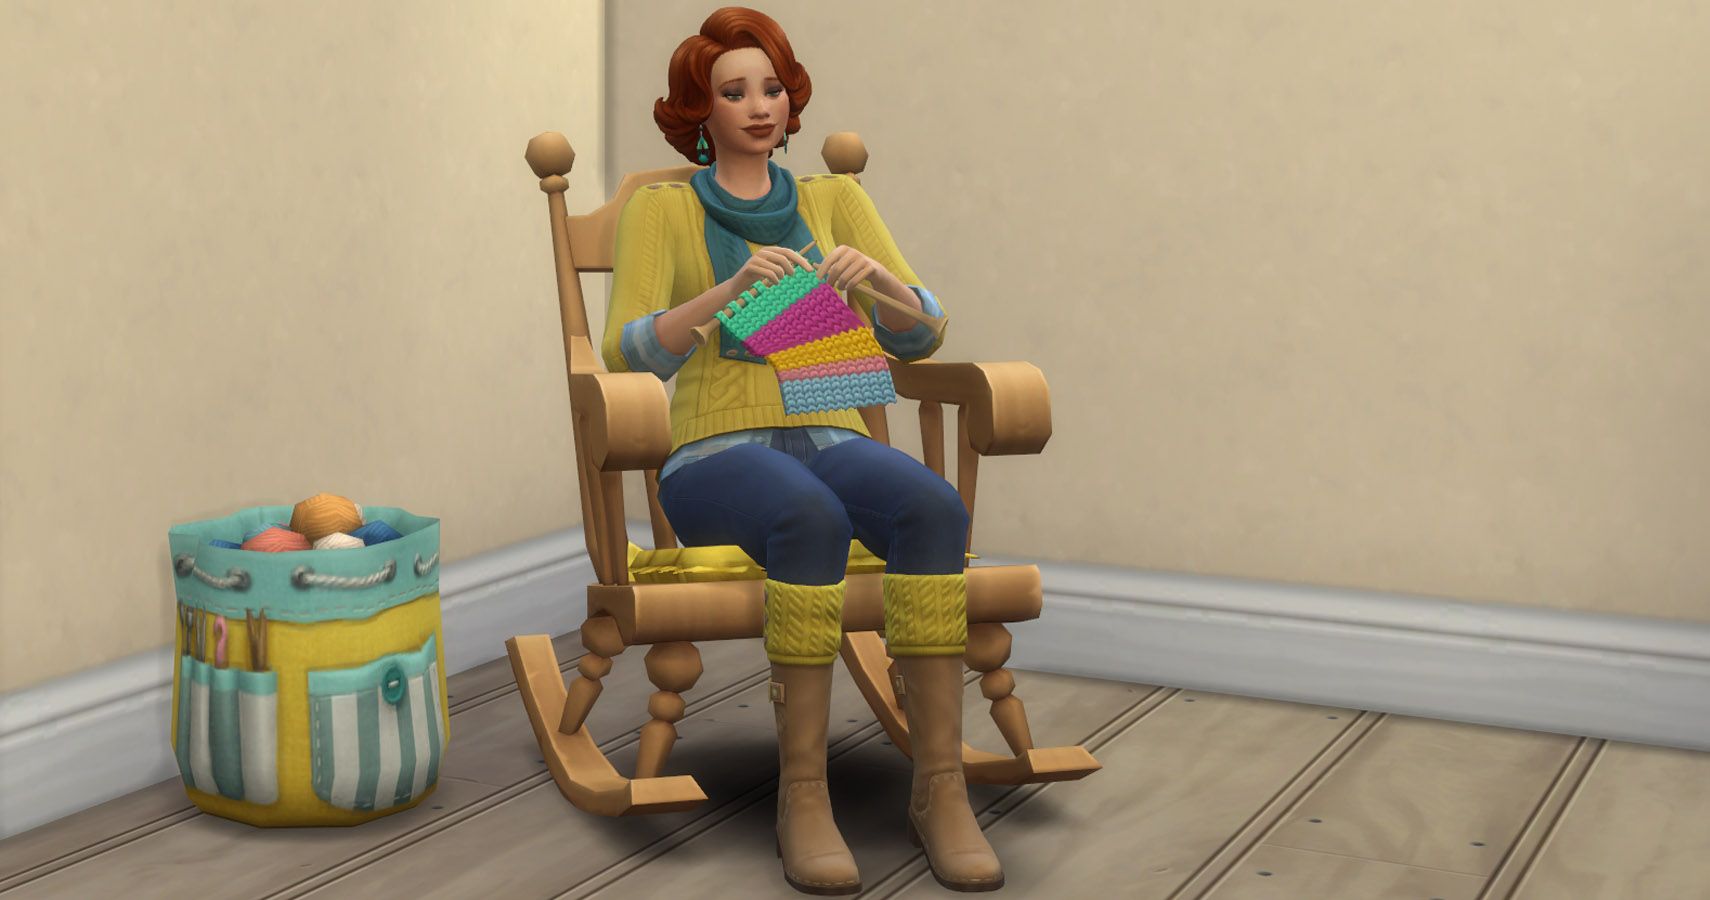 A sim sitting on a rocking chair and knitting.